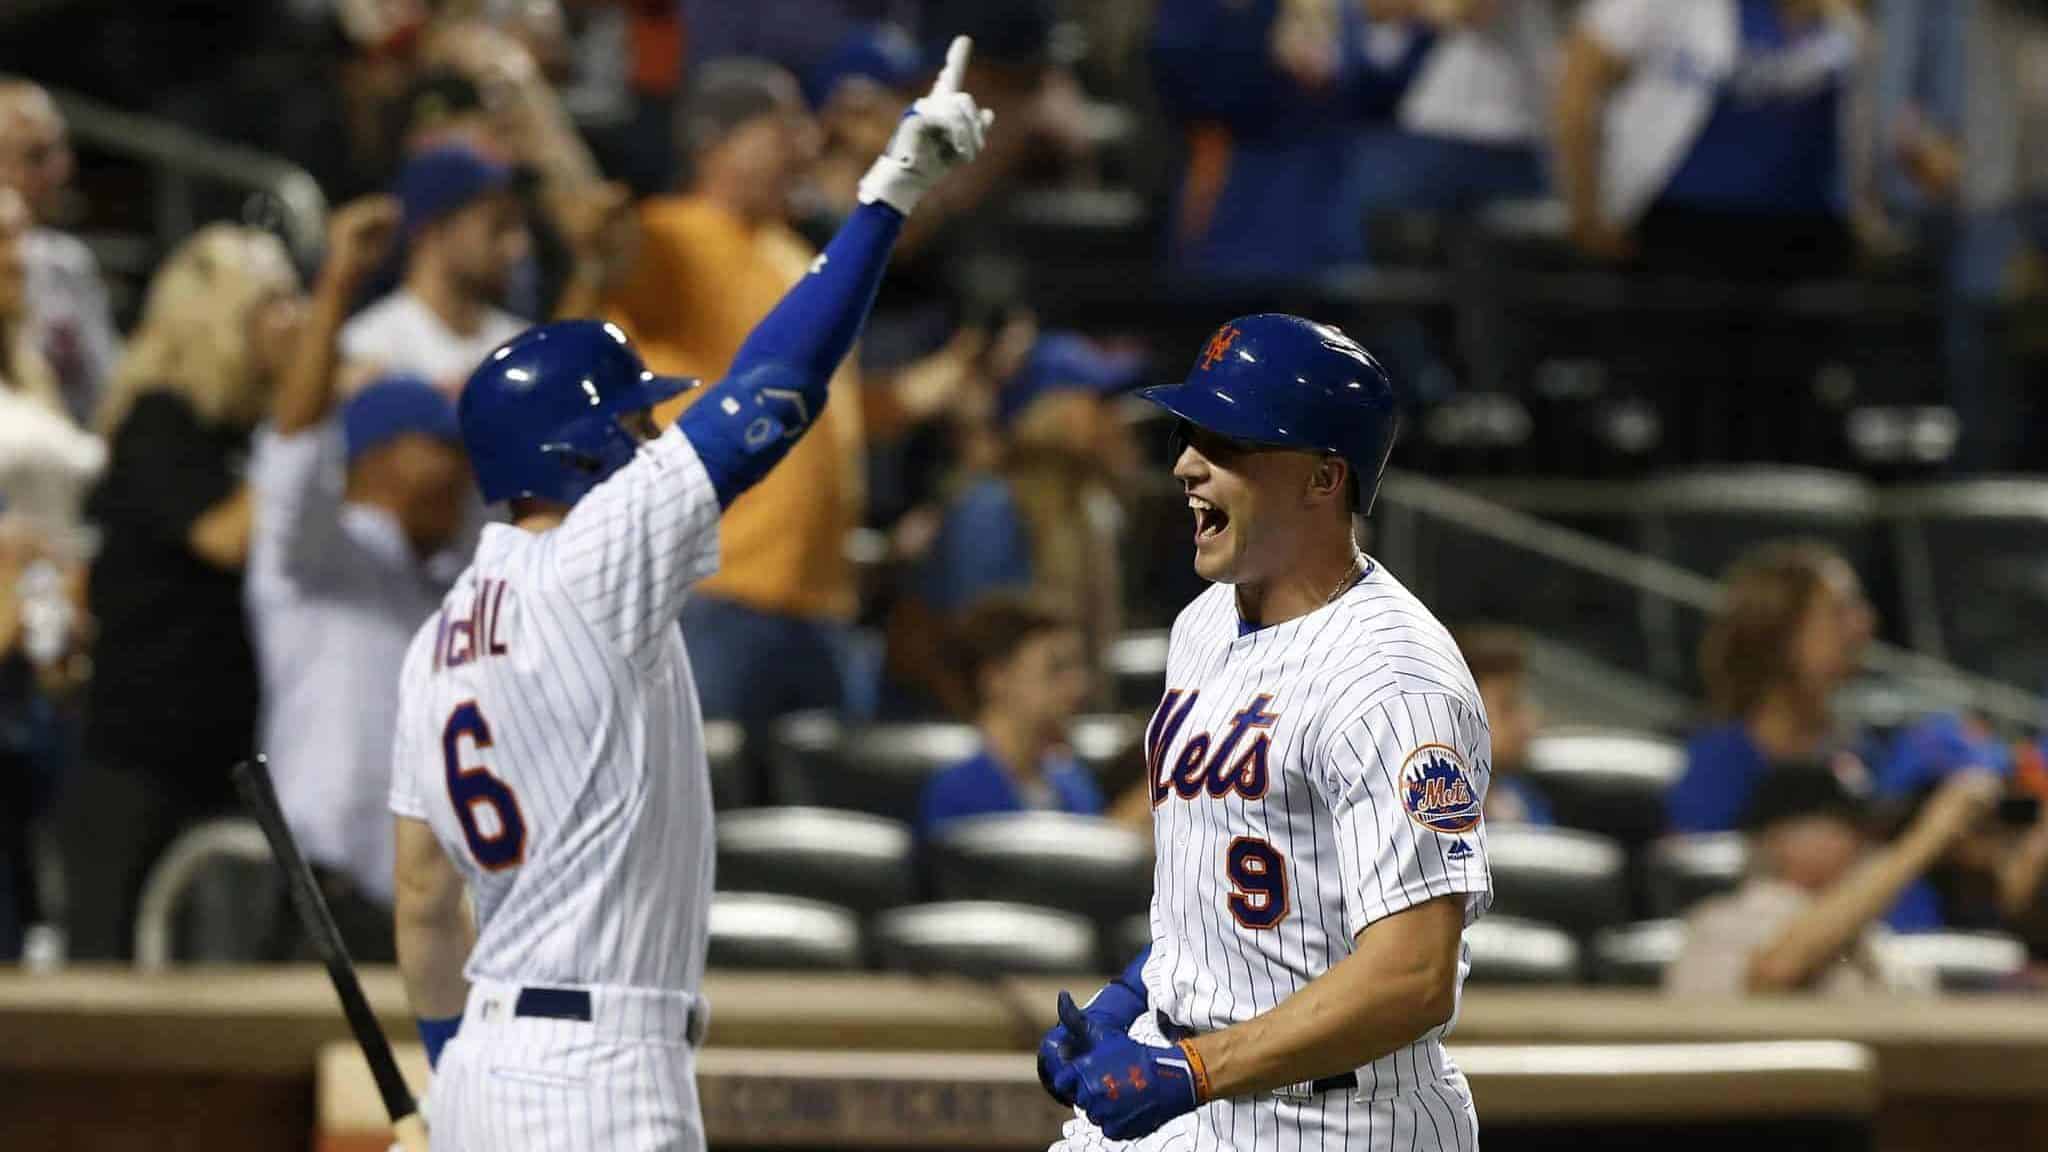 NEW YORK, NEW YORK - SEPTEMBER 14: Brandon Nimmo #9 of the New York Mets celebrates with teammate Jeff McNeil #6 after scoring a run in the eighth inning against the Los Angeles Dodgers at Citi Field on September 14, 2019 in New York City.